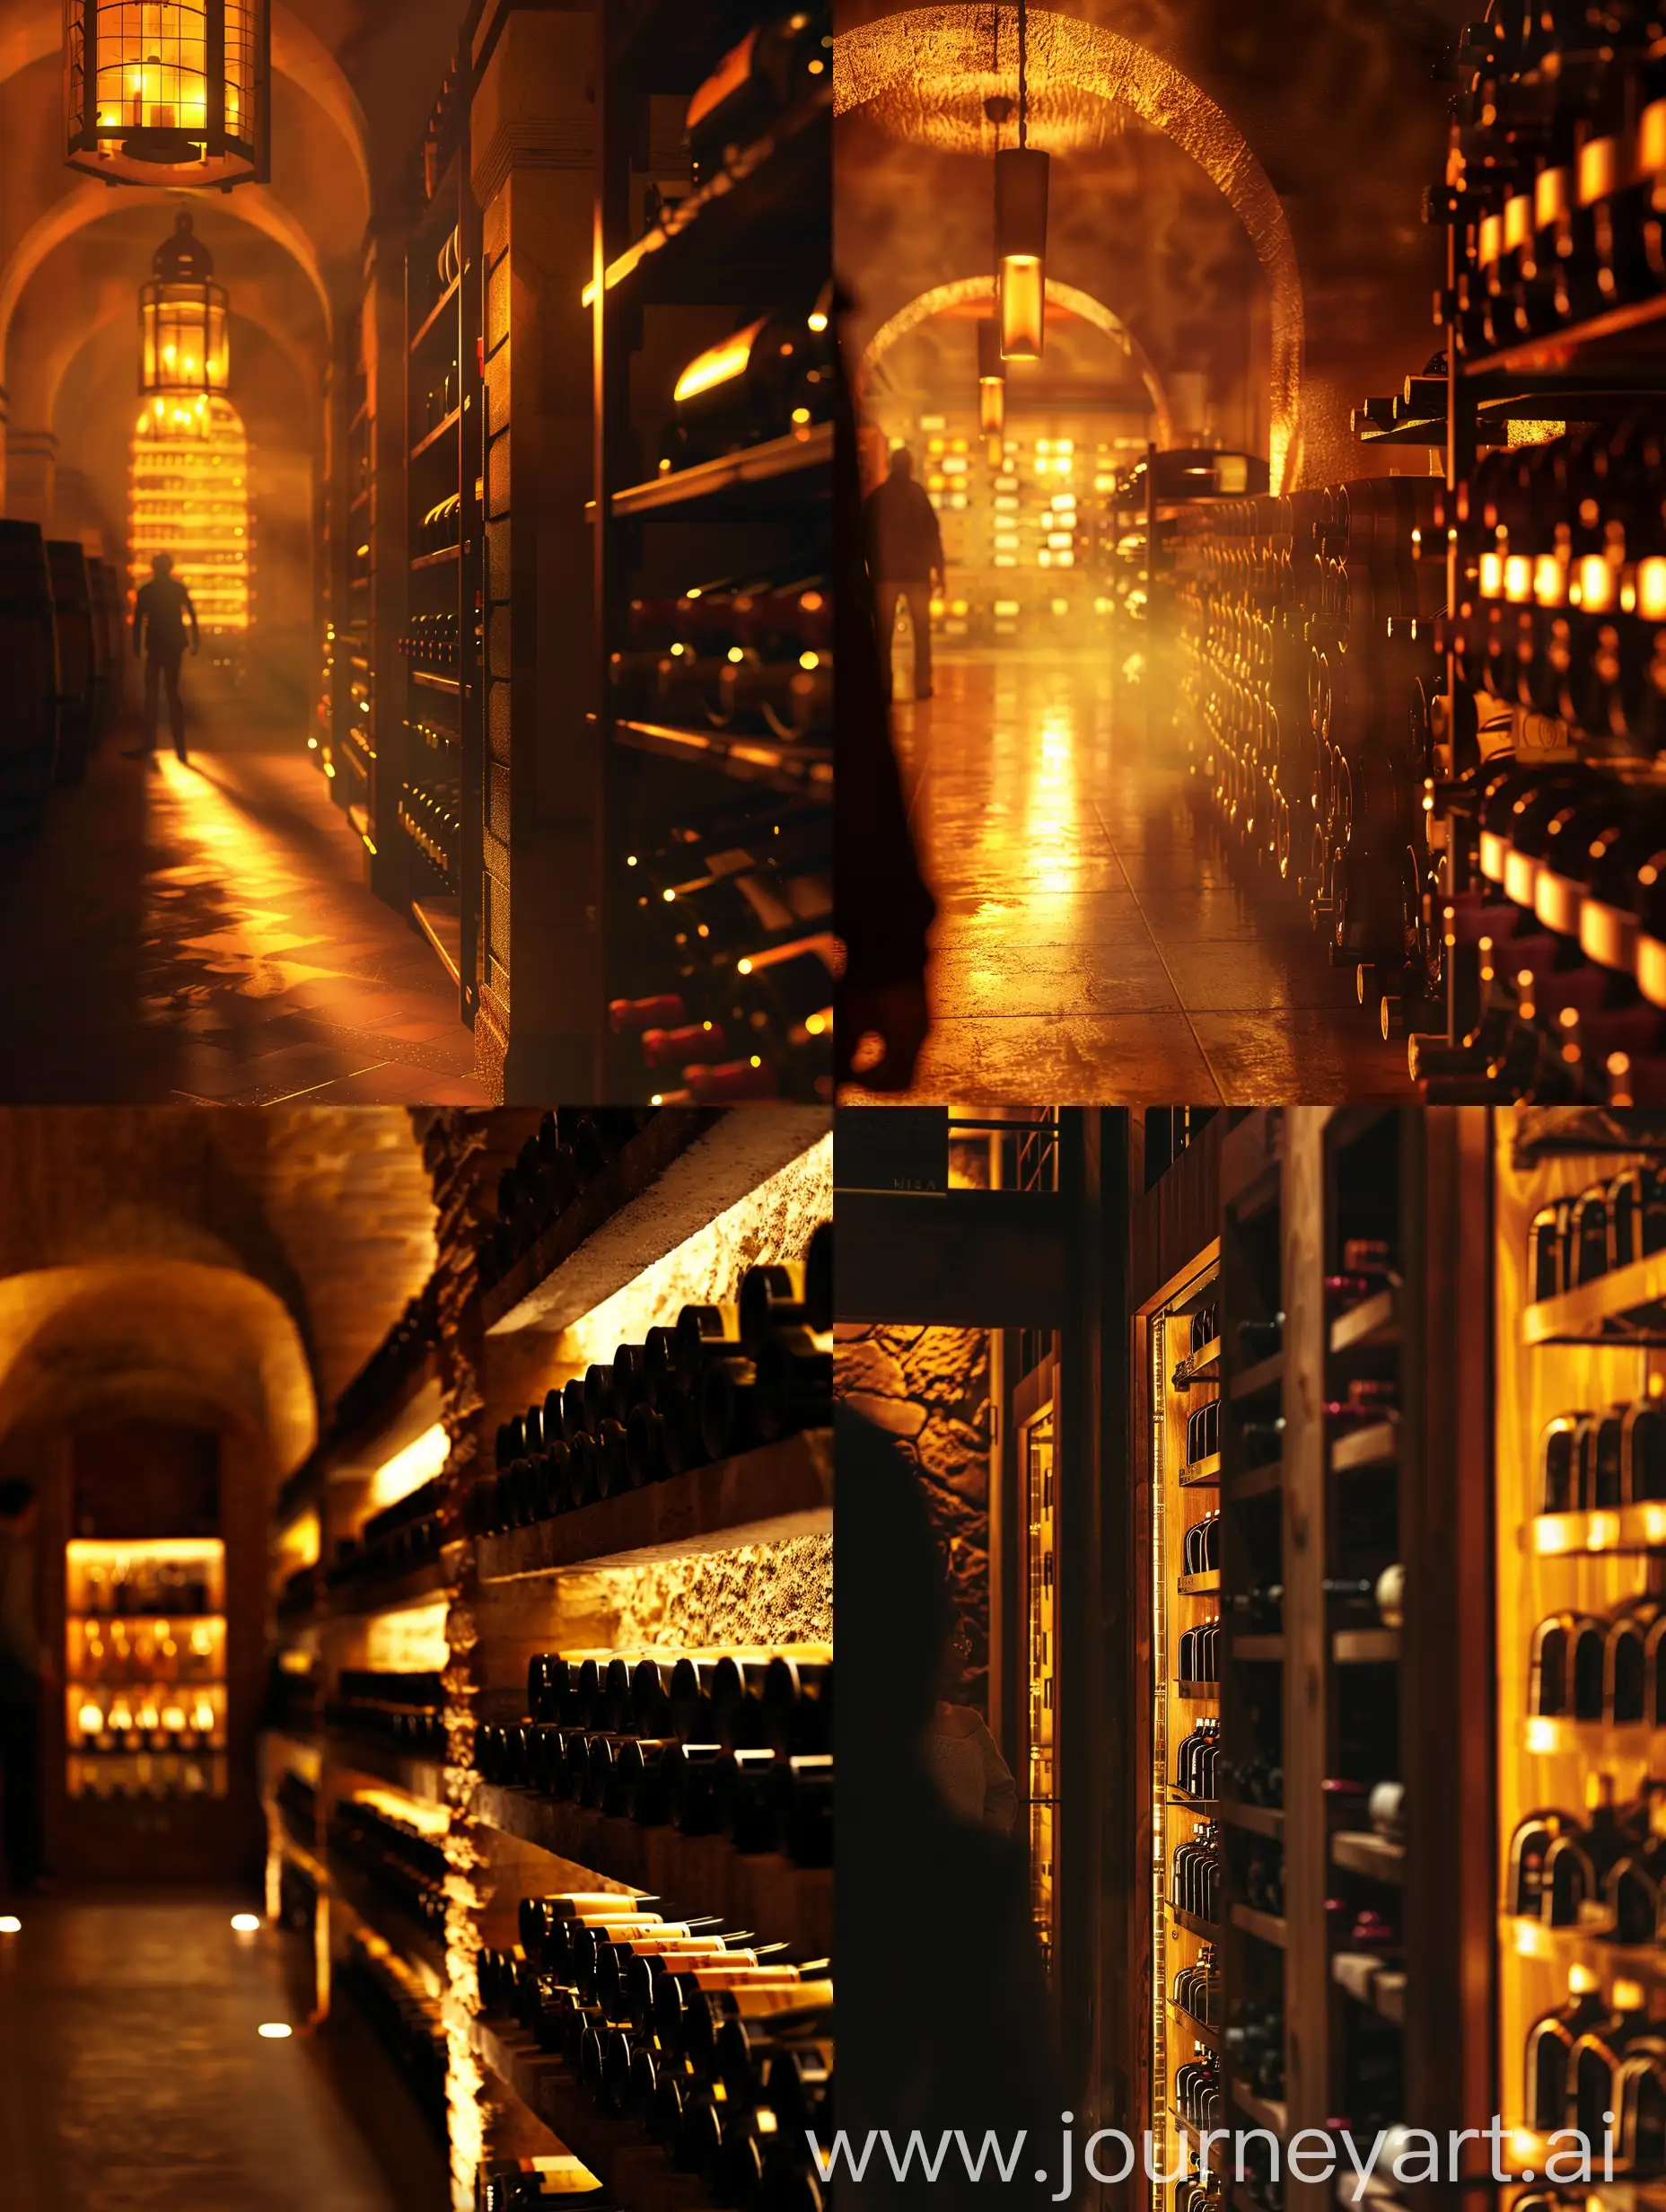 Cozy-Wine-Cellar-with-Warm-Lighting-Perfect-Background-for-Wine-Magazine